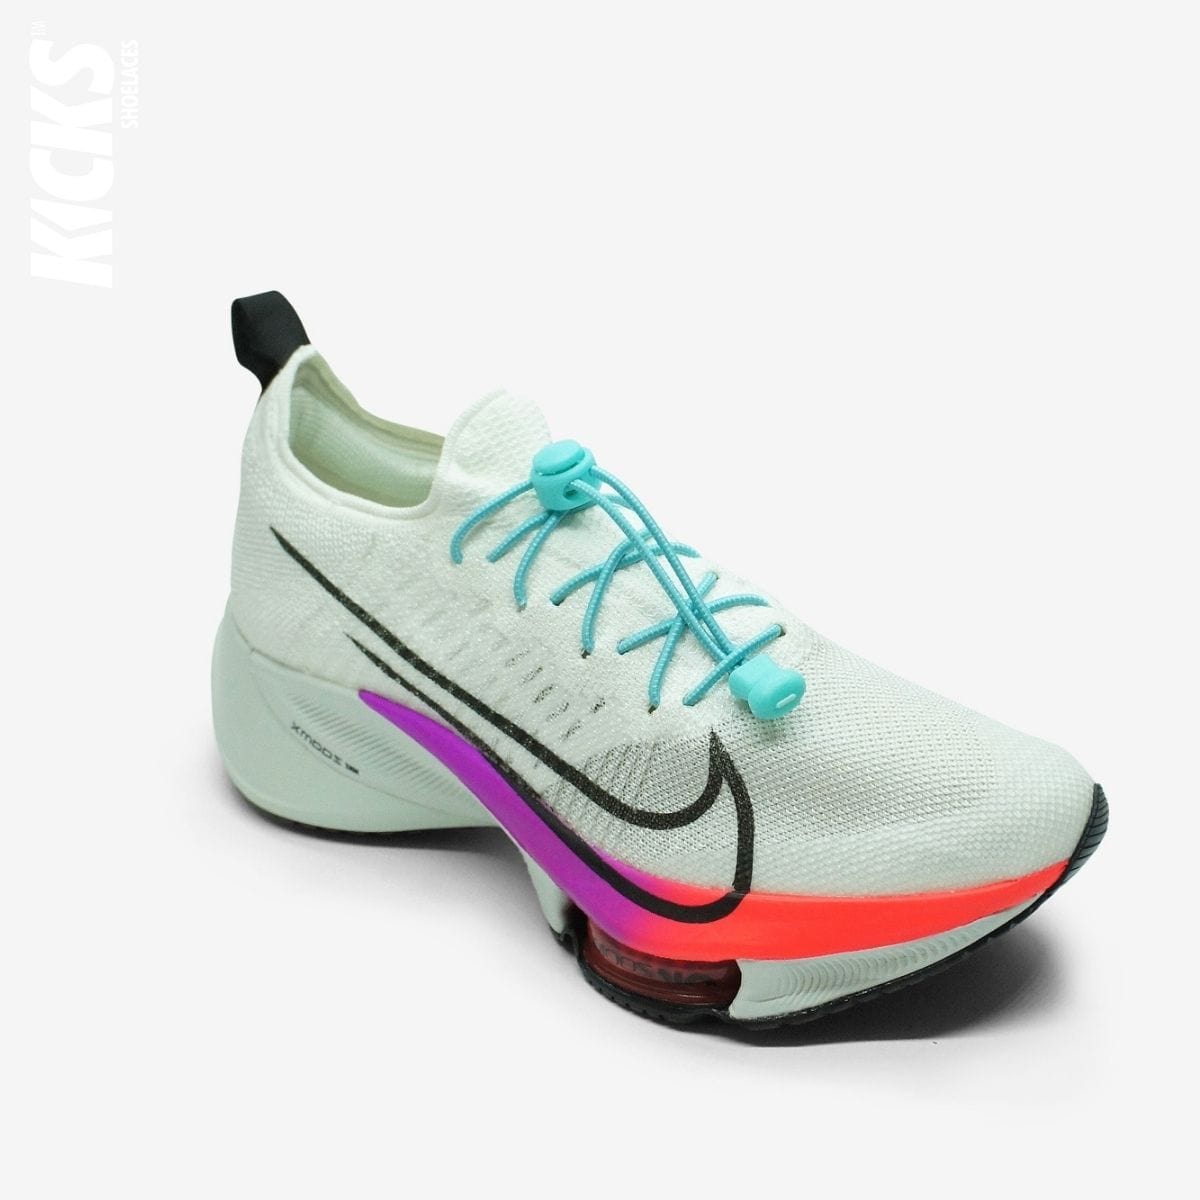 quick-laces-with-pastel-blue-elastic-no-tie-shoelaces-on-nike-running-shoe-by-kicks-shoelaces